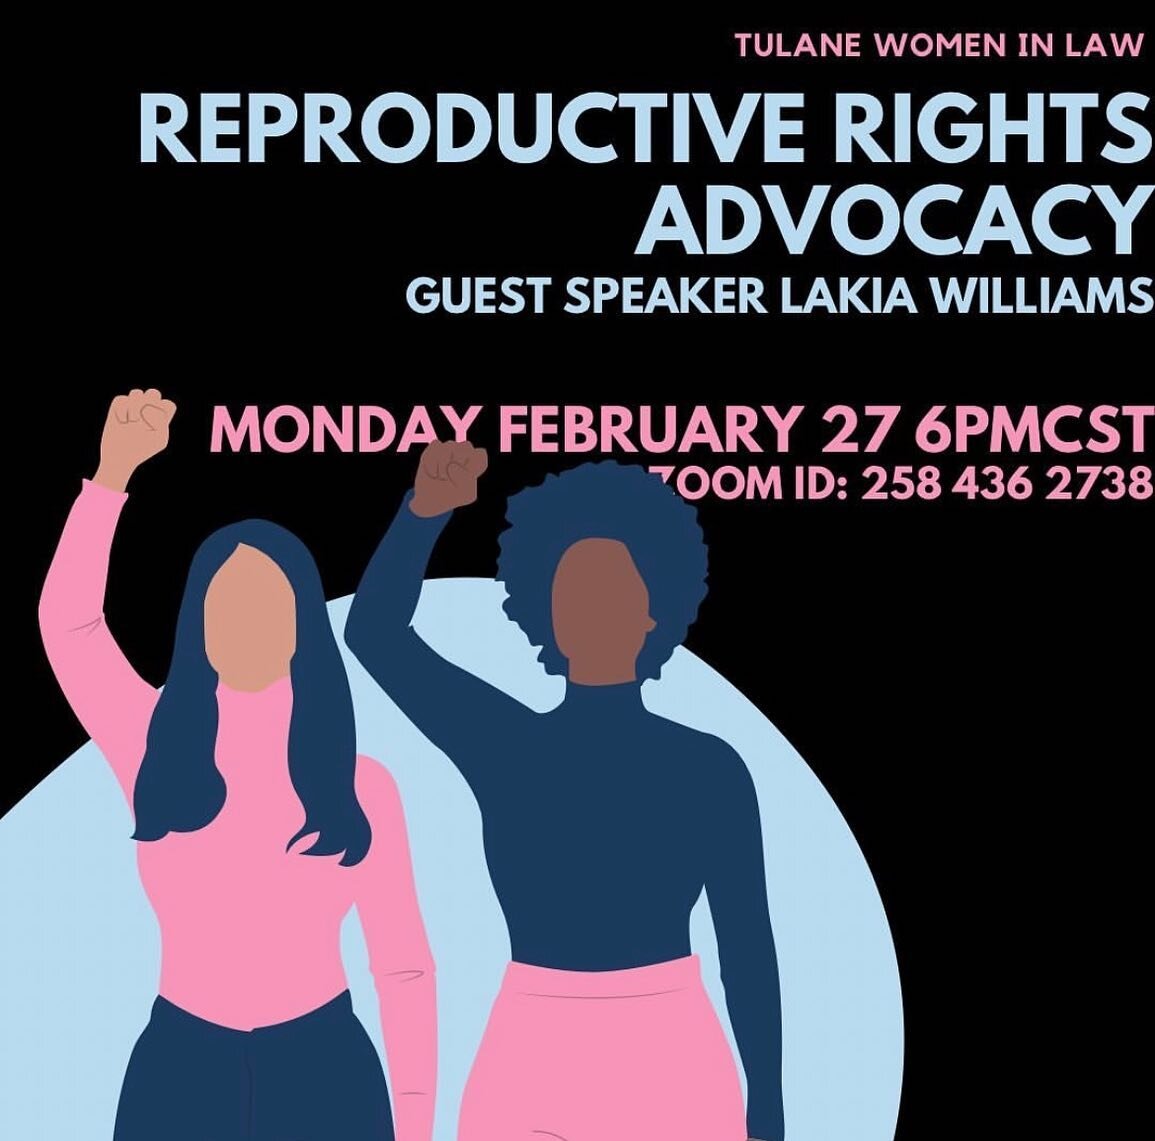 BFR IS GOING TO LAW SCHOOL! I will be speaking about reproductive rights and justice at @tulanewomeninlaw

Guest speaker LaKia Williams, a reproductive Justice
advocate, will discuss the origins of the RJ movement
and Black women's involvement throug